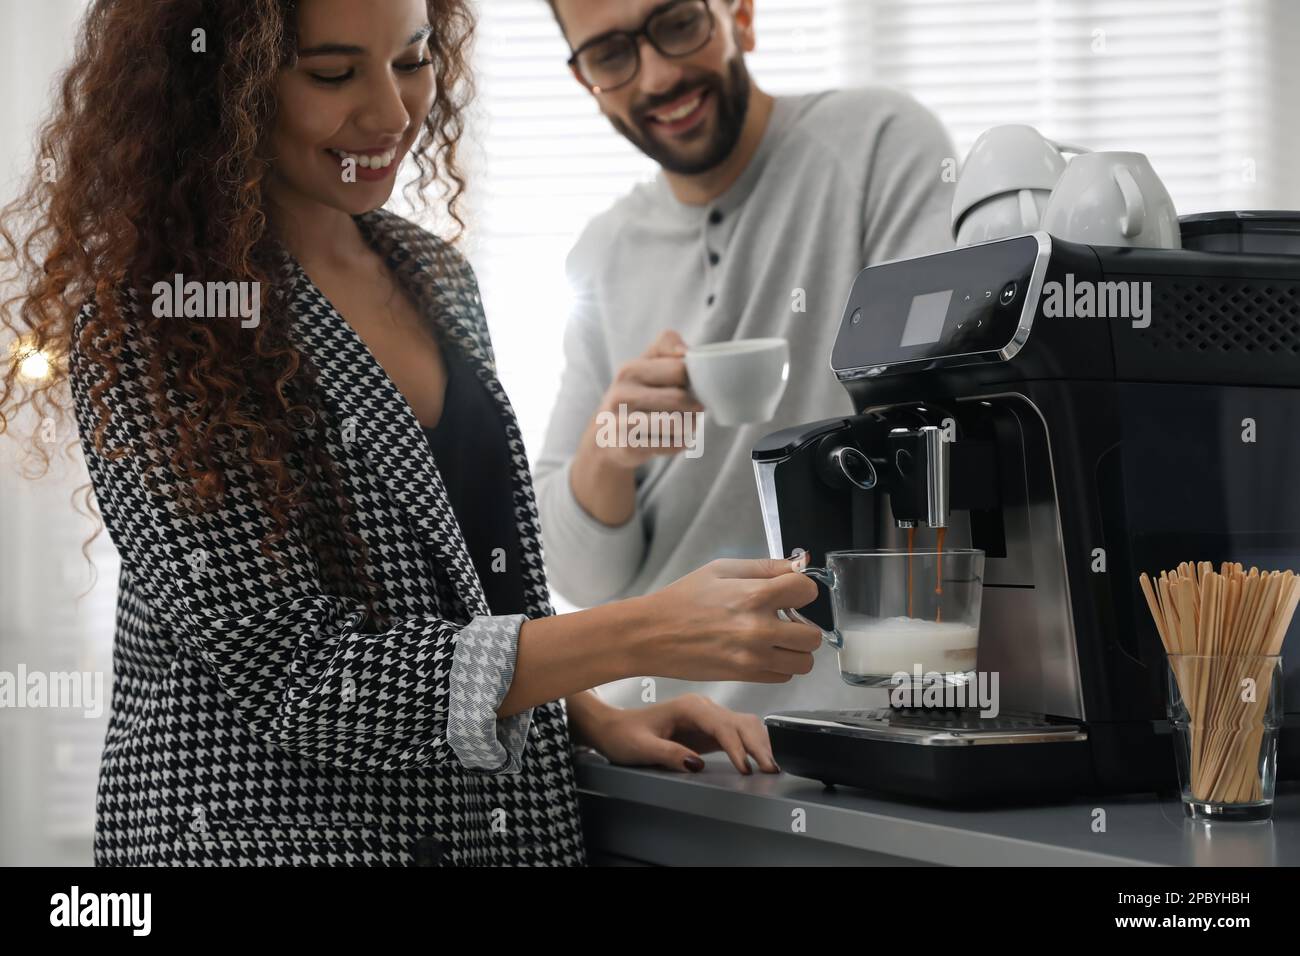 Making Tasty Coffee in the Home Kitchen. Coffee Maker and Accessories  Needed To Prepare it Stock Image - Image of cooking, espresso: 159871397